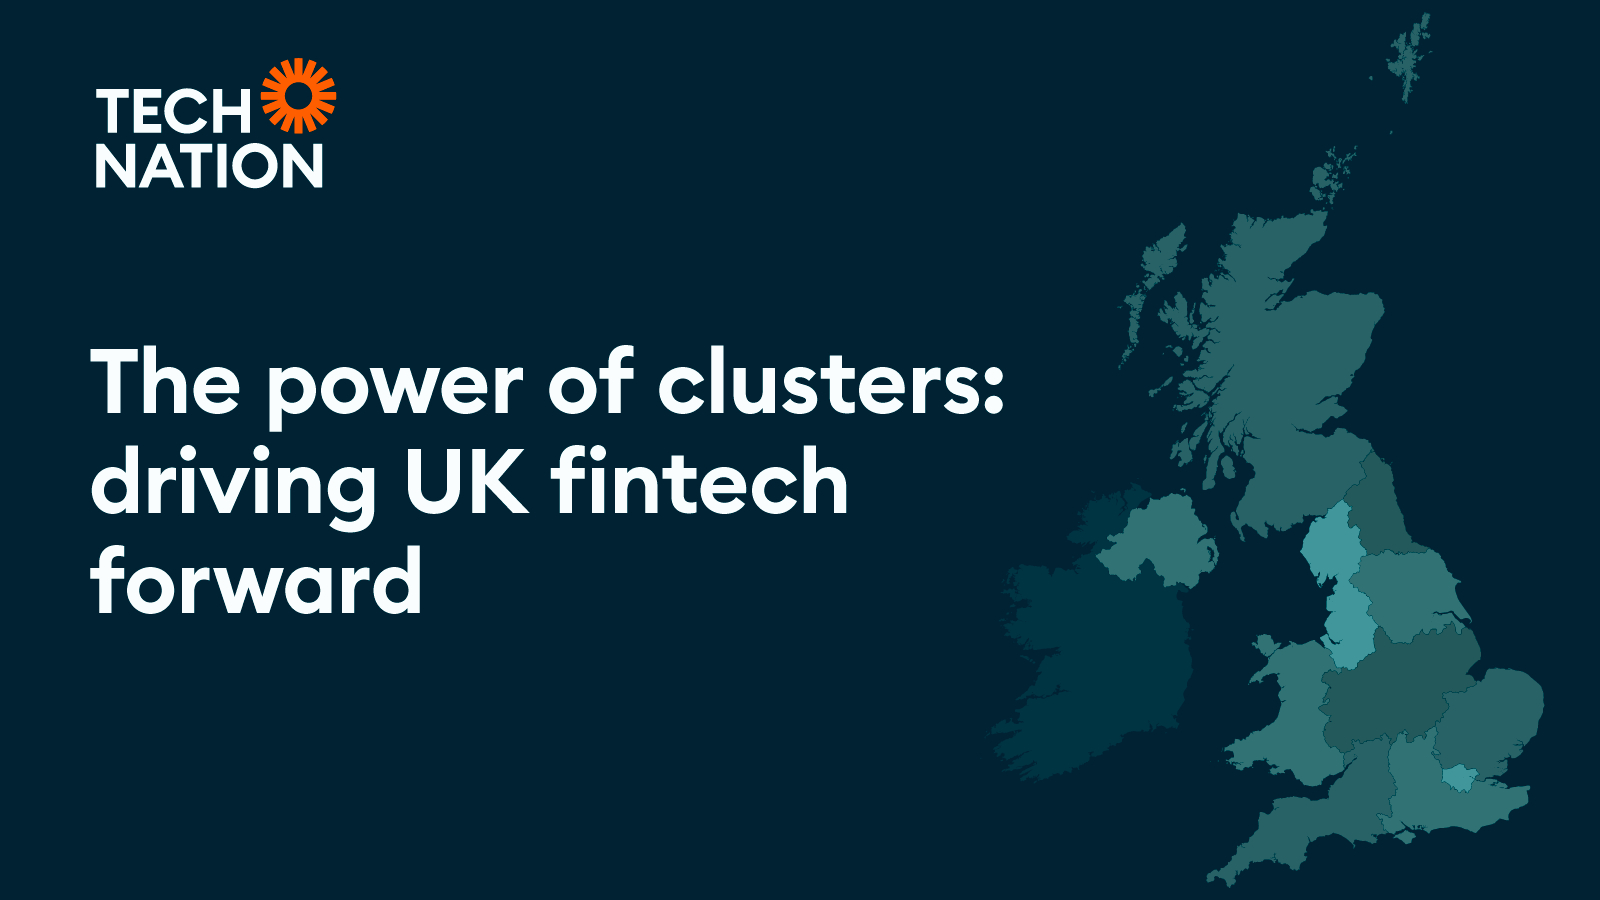 The power of clusters: driving UK fintech forward